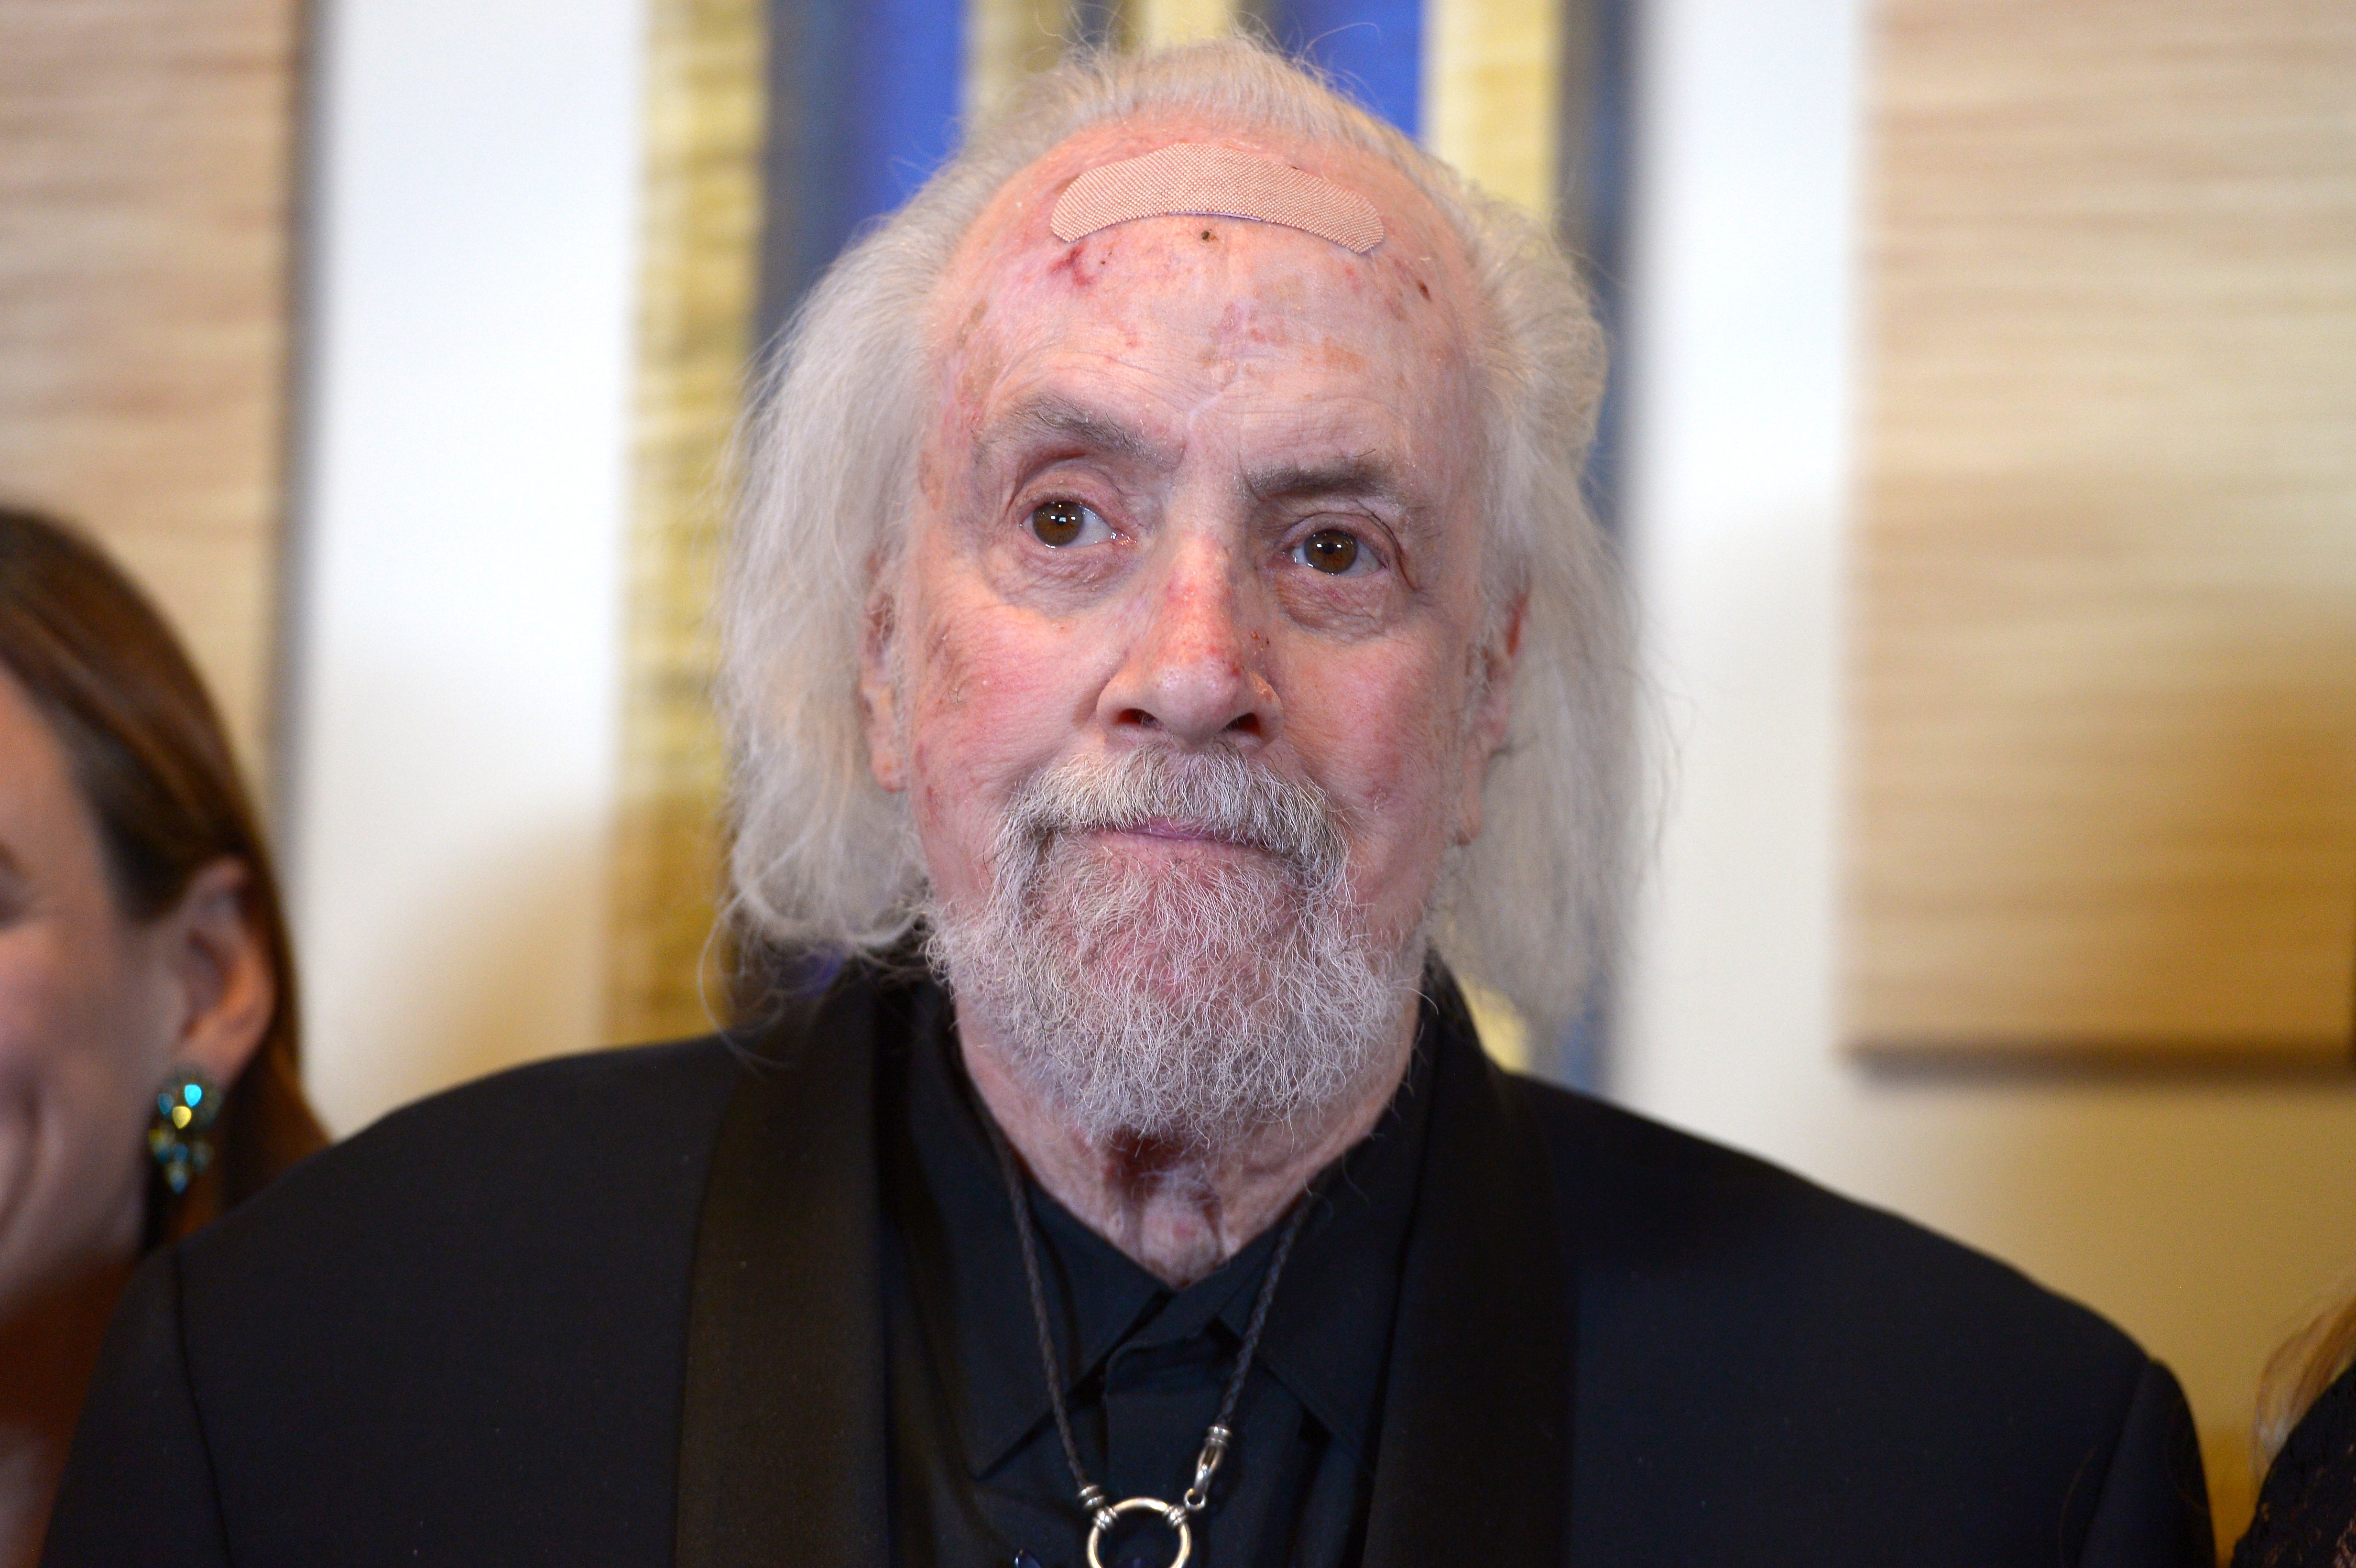 Robert Towne attending the Writers Guild Awards in Los Angeles in 2016